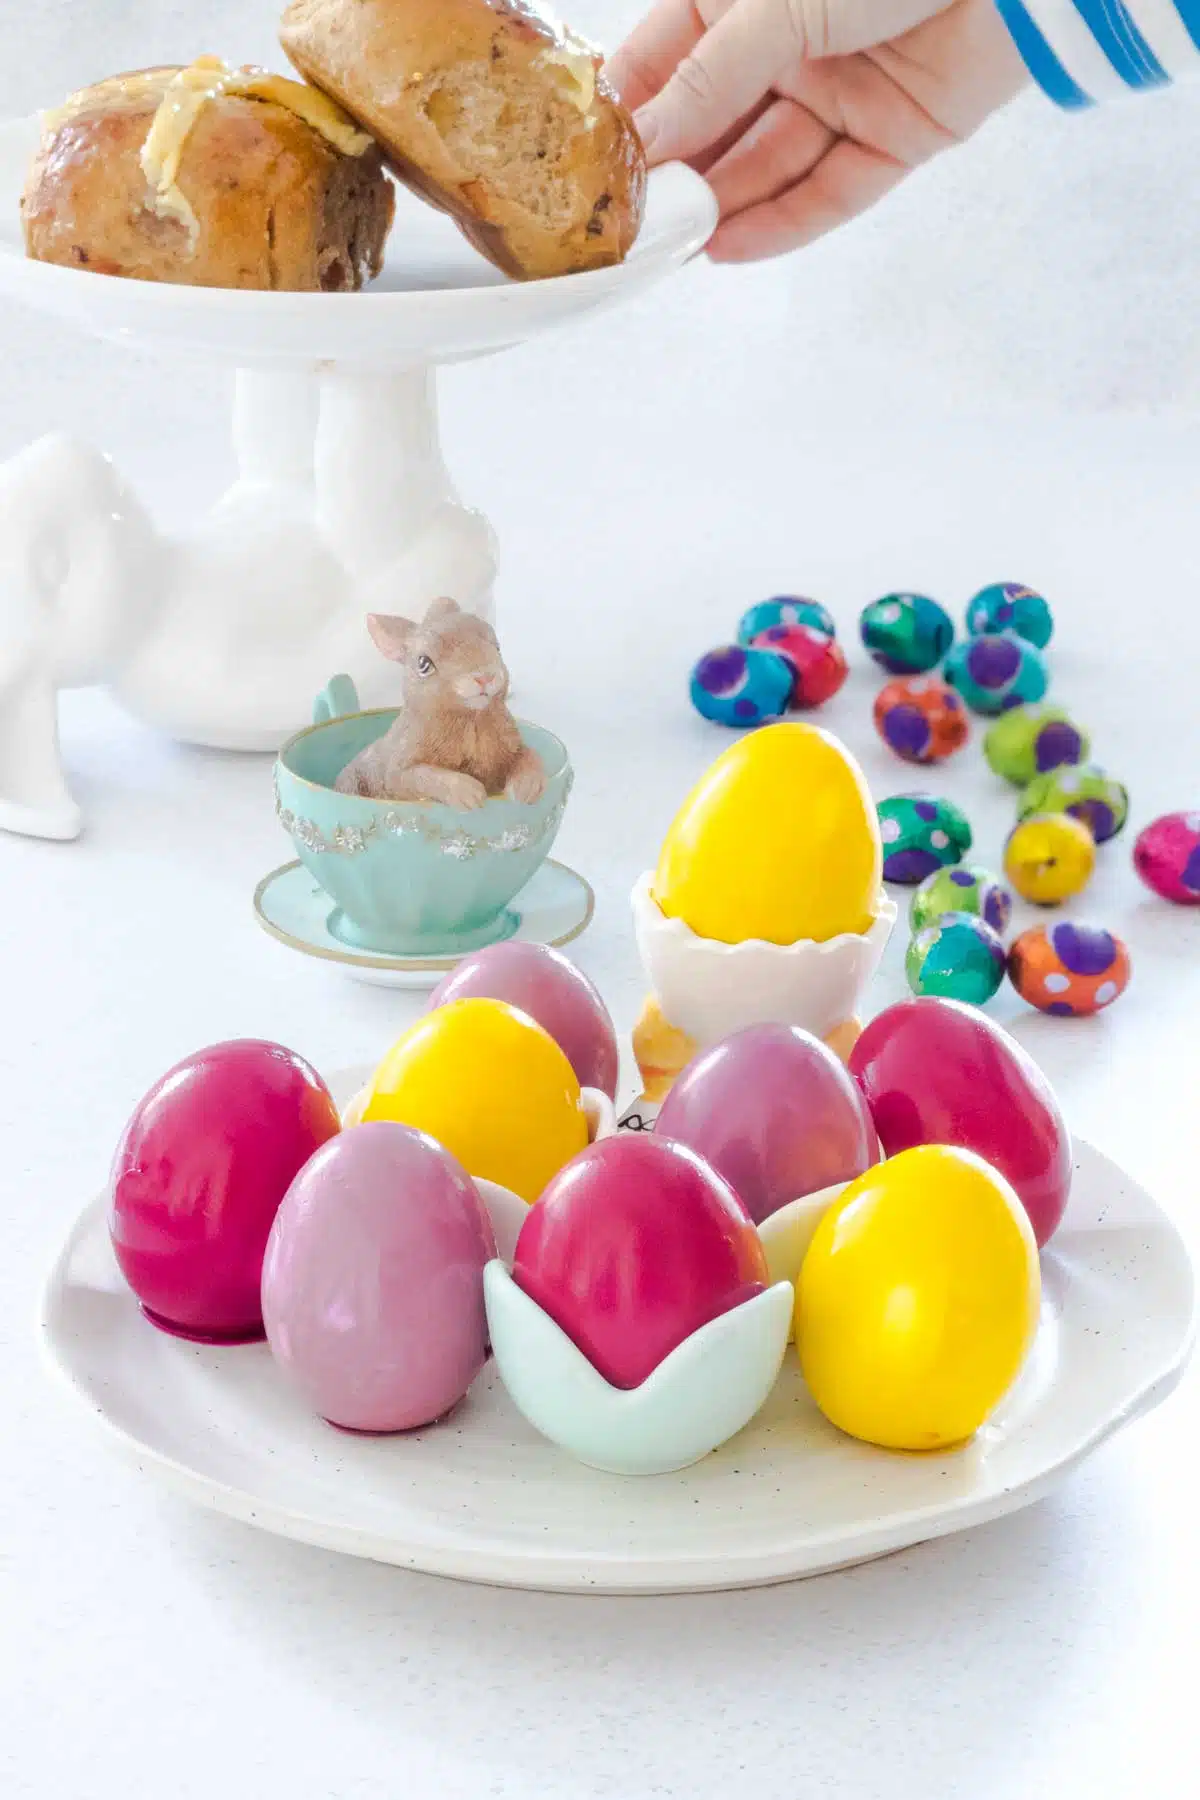 Brightly coloured pickled eggs are sitting on a white plate with some in egg cups. Behind them chocolate eggs are spread across the table, along with a bunny in a teacup decoration and a rabbit cake stand with hot cross buns on it.